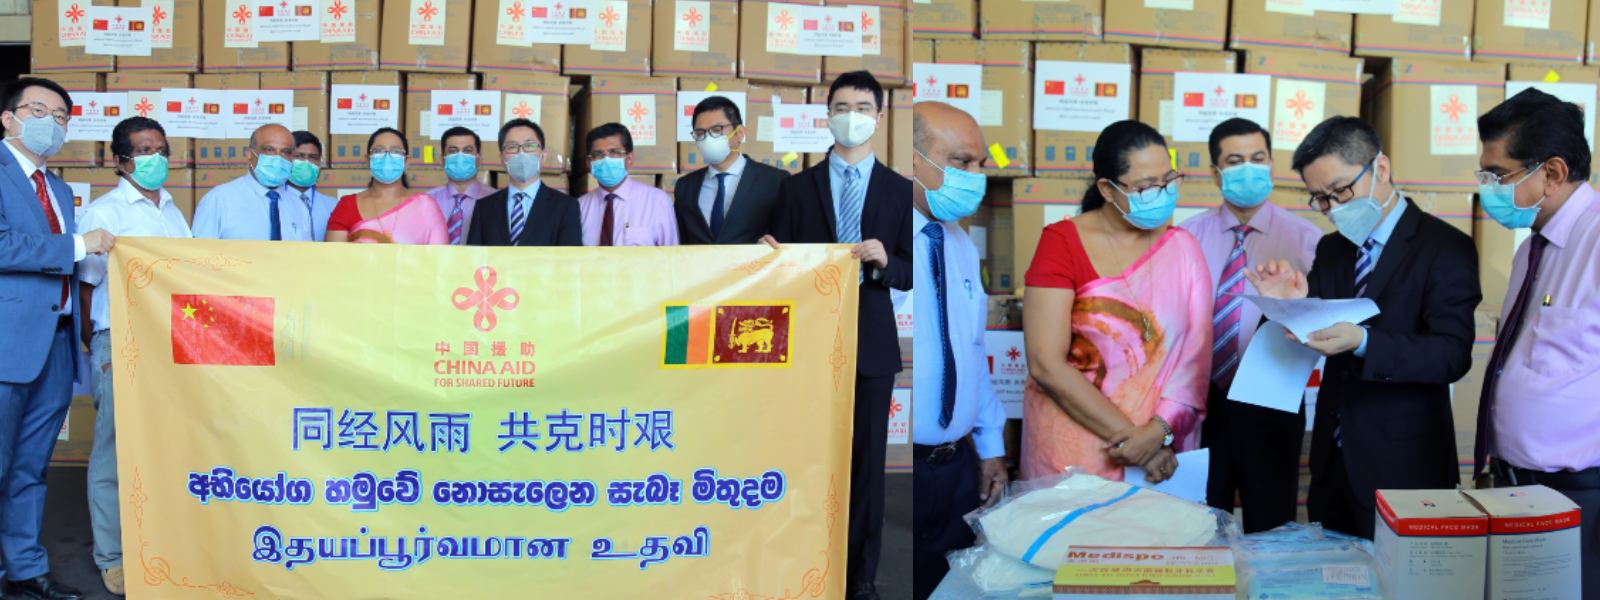 Second batch of Chinese Aid to combat COVID-19 handed over to Sri Lanka